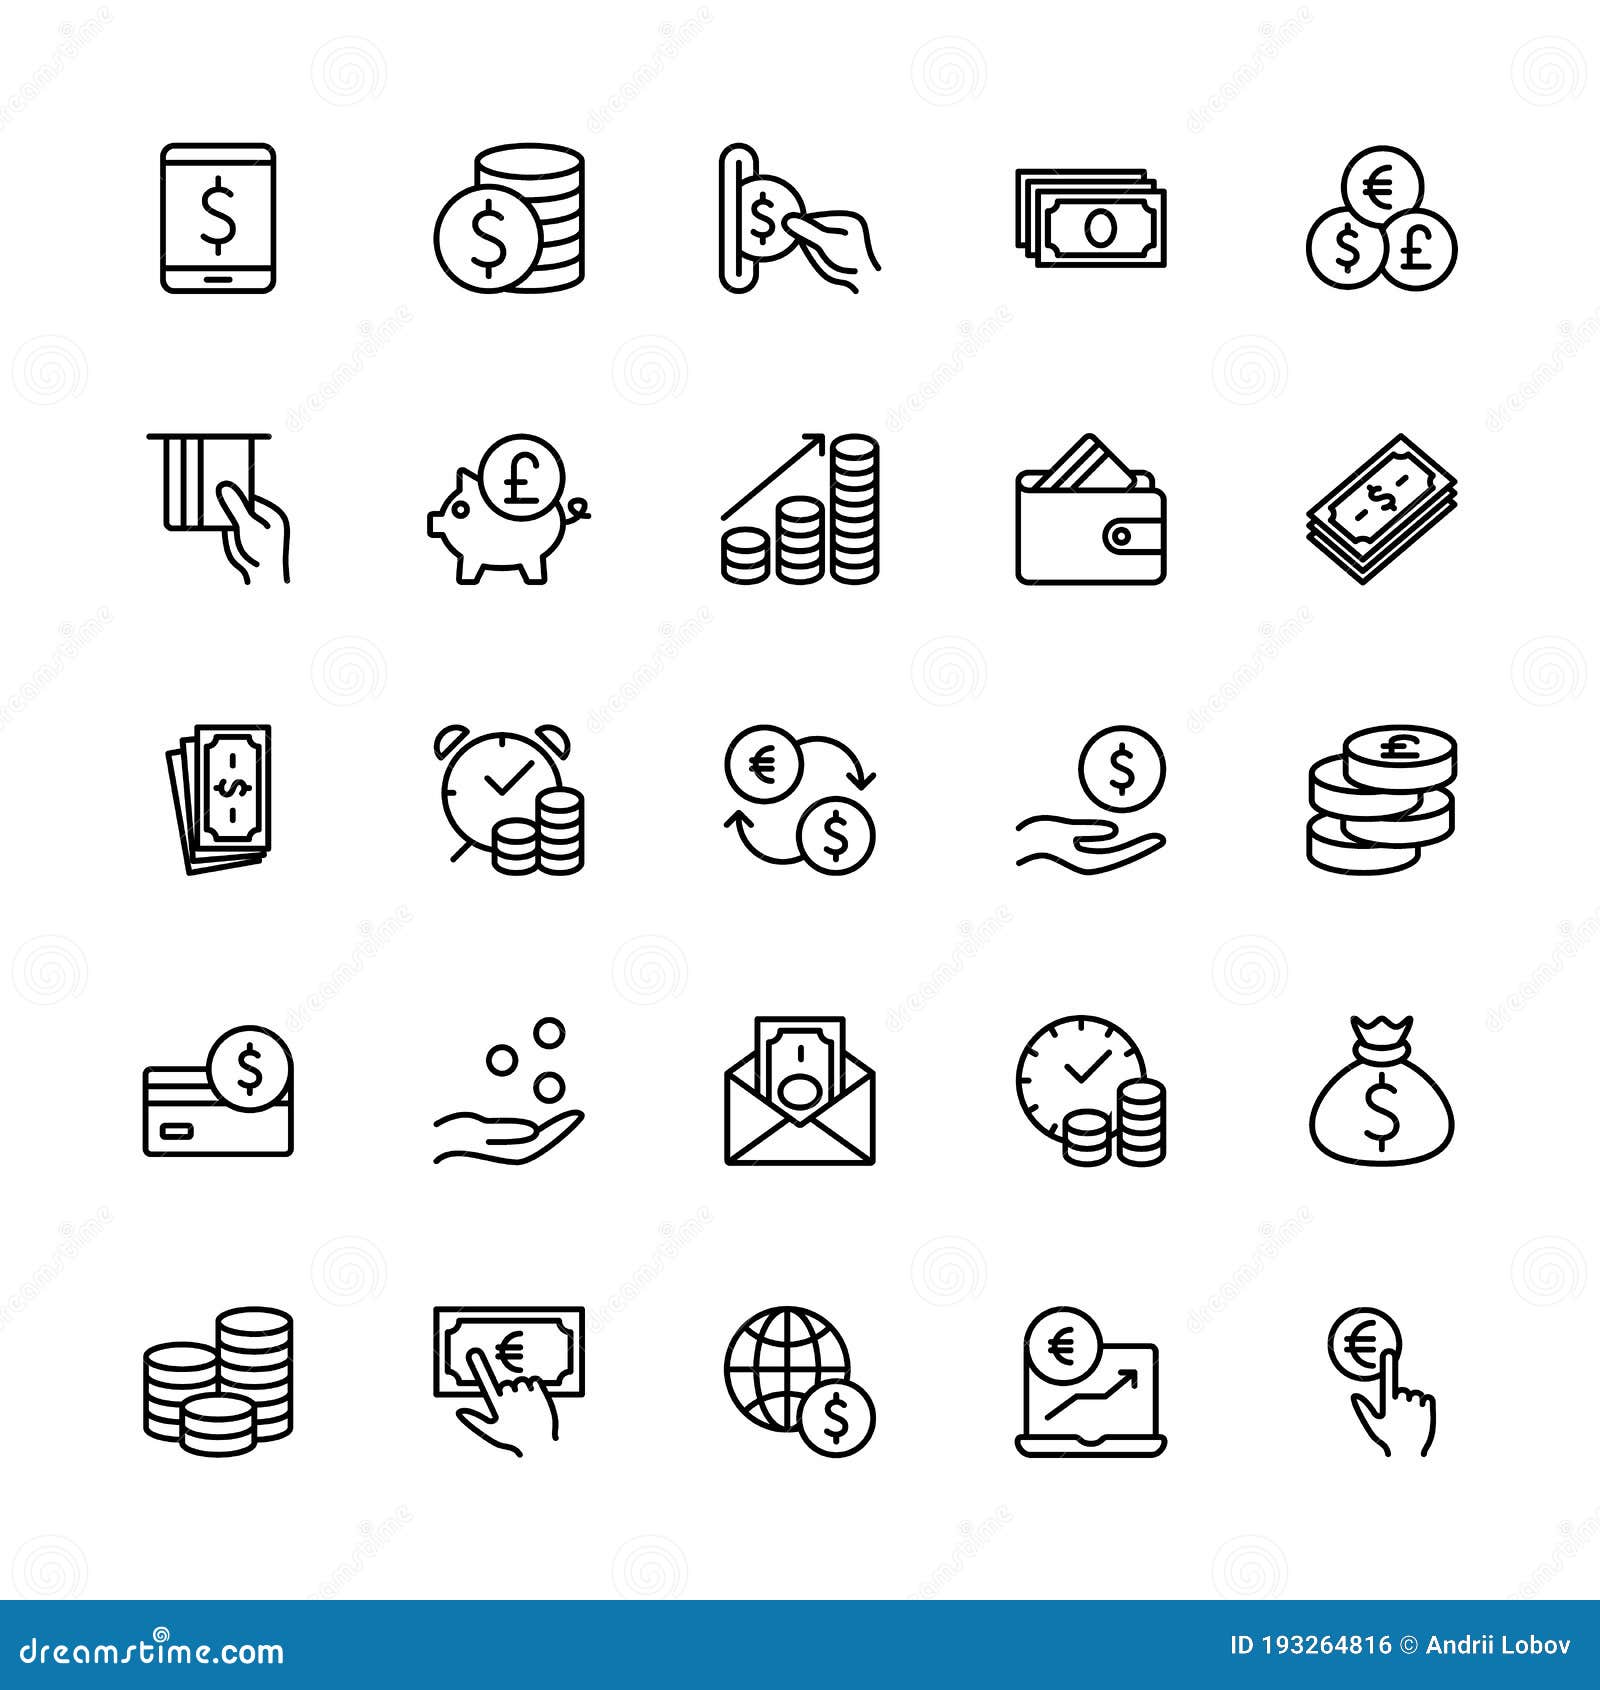 Currency Vector Symbol Icons Set. Contains Icon Exchange Rate Currency ...